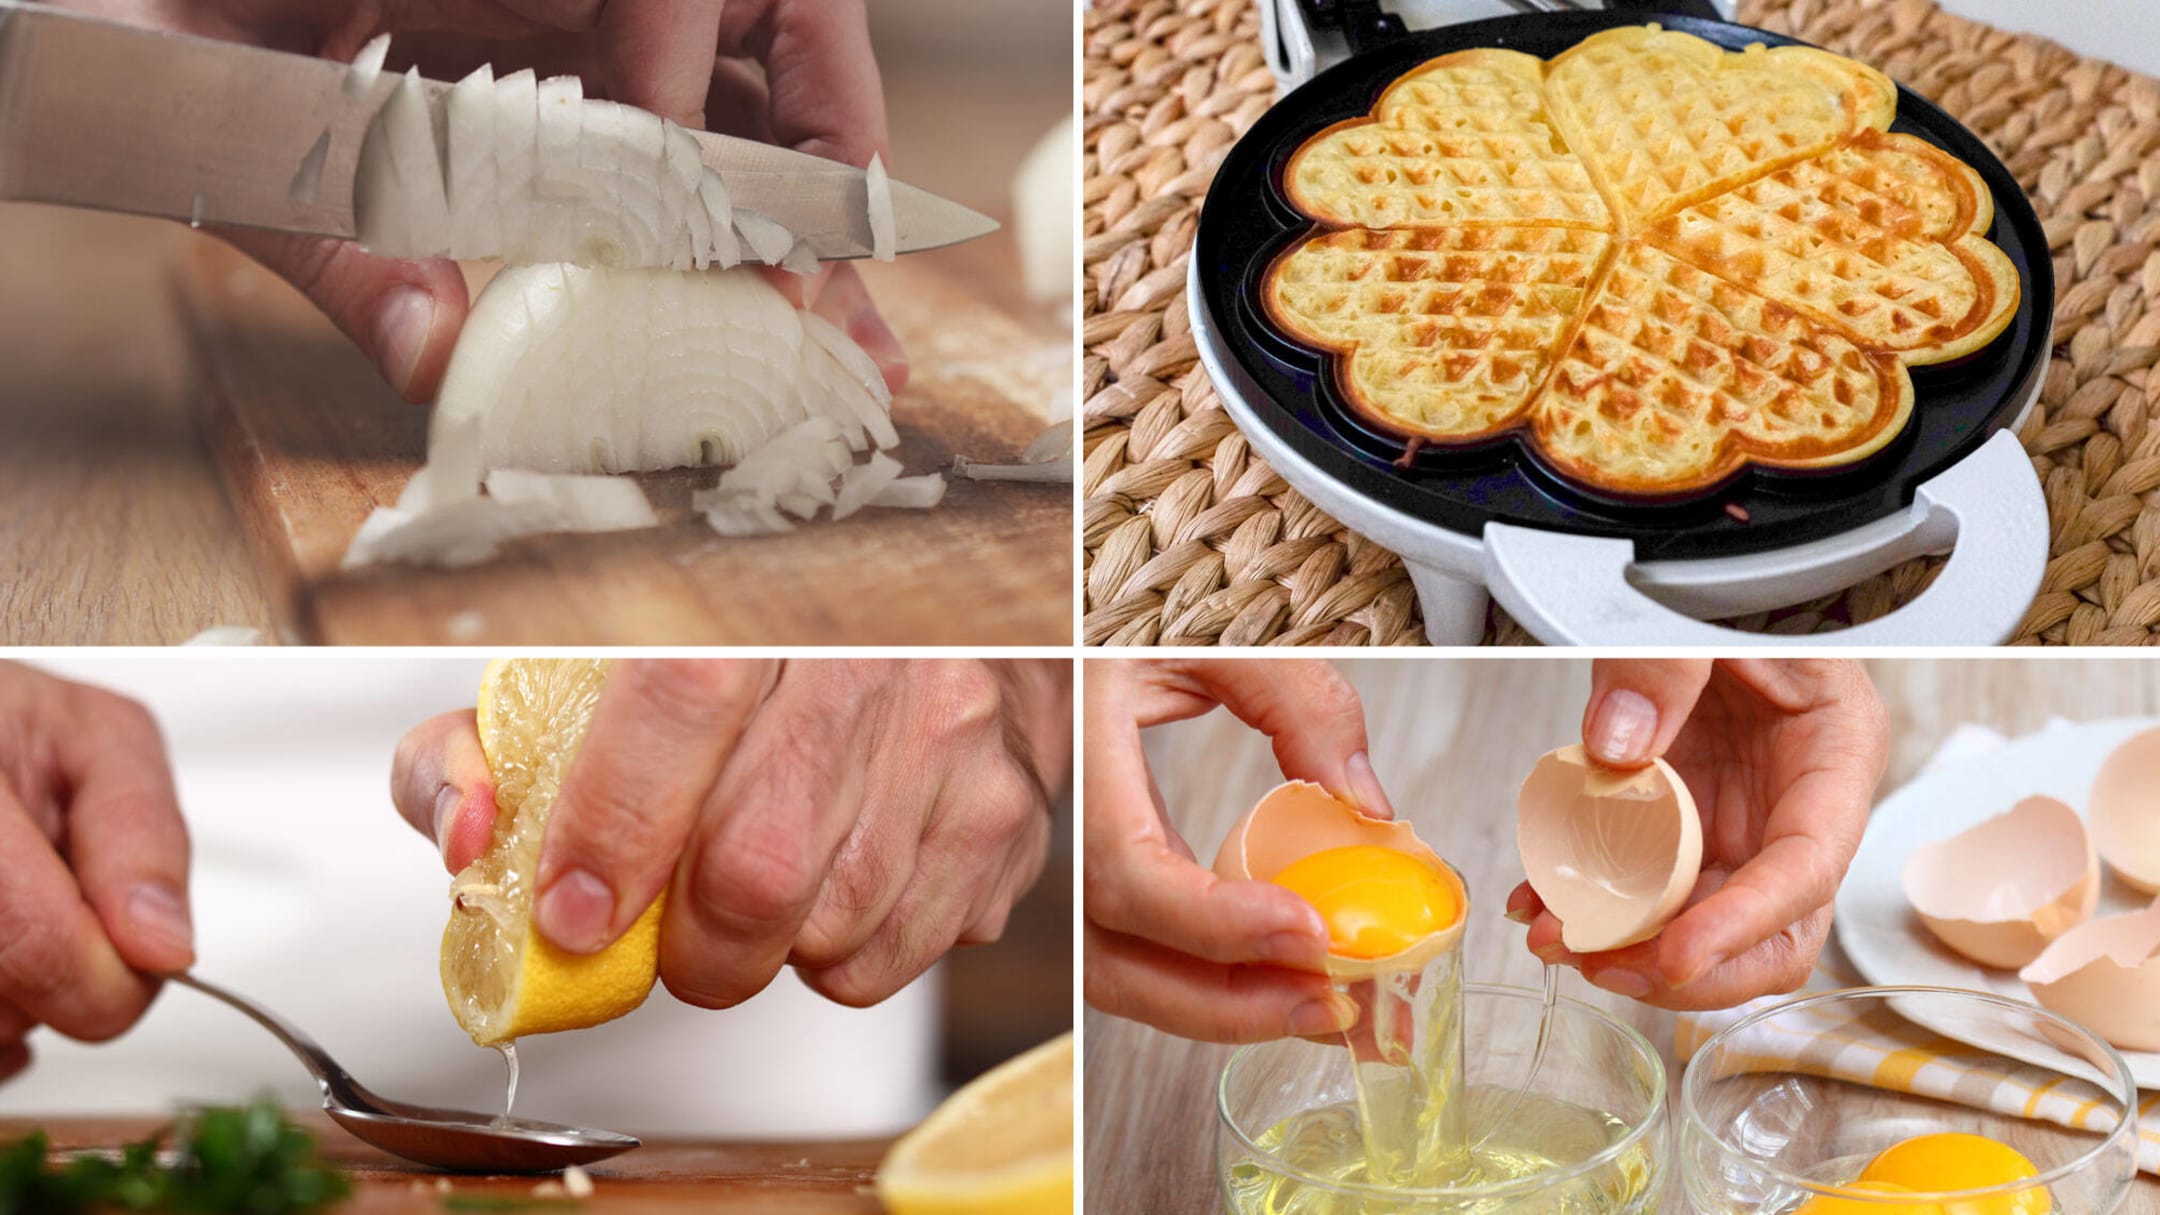 25 cooking hacks you won't believe you didn't already know